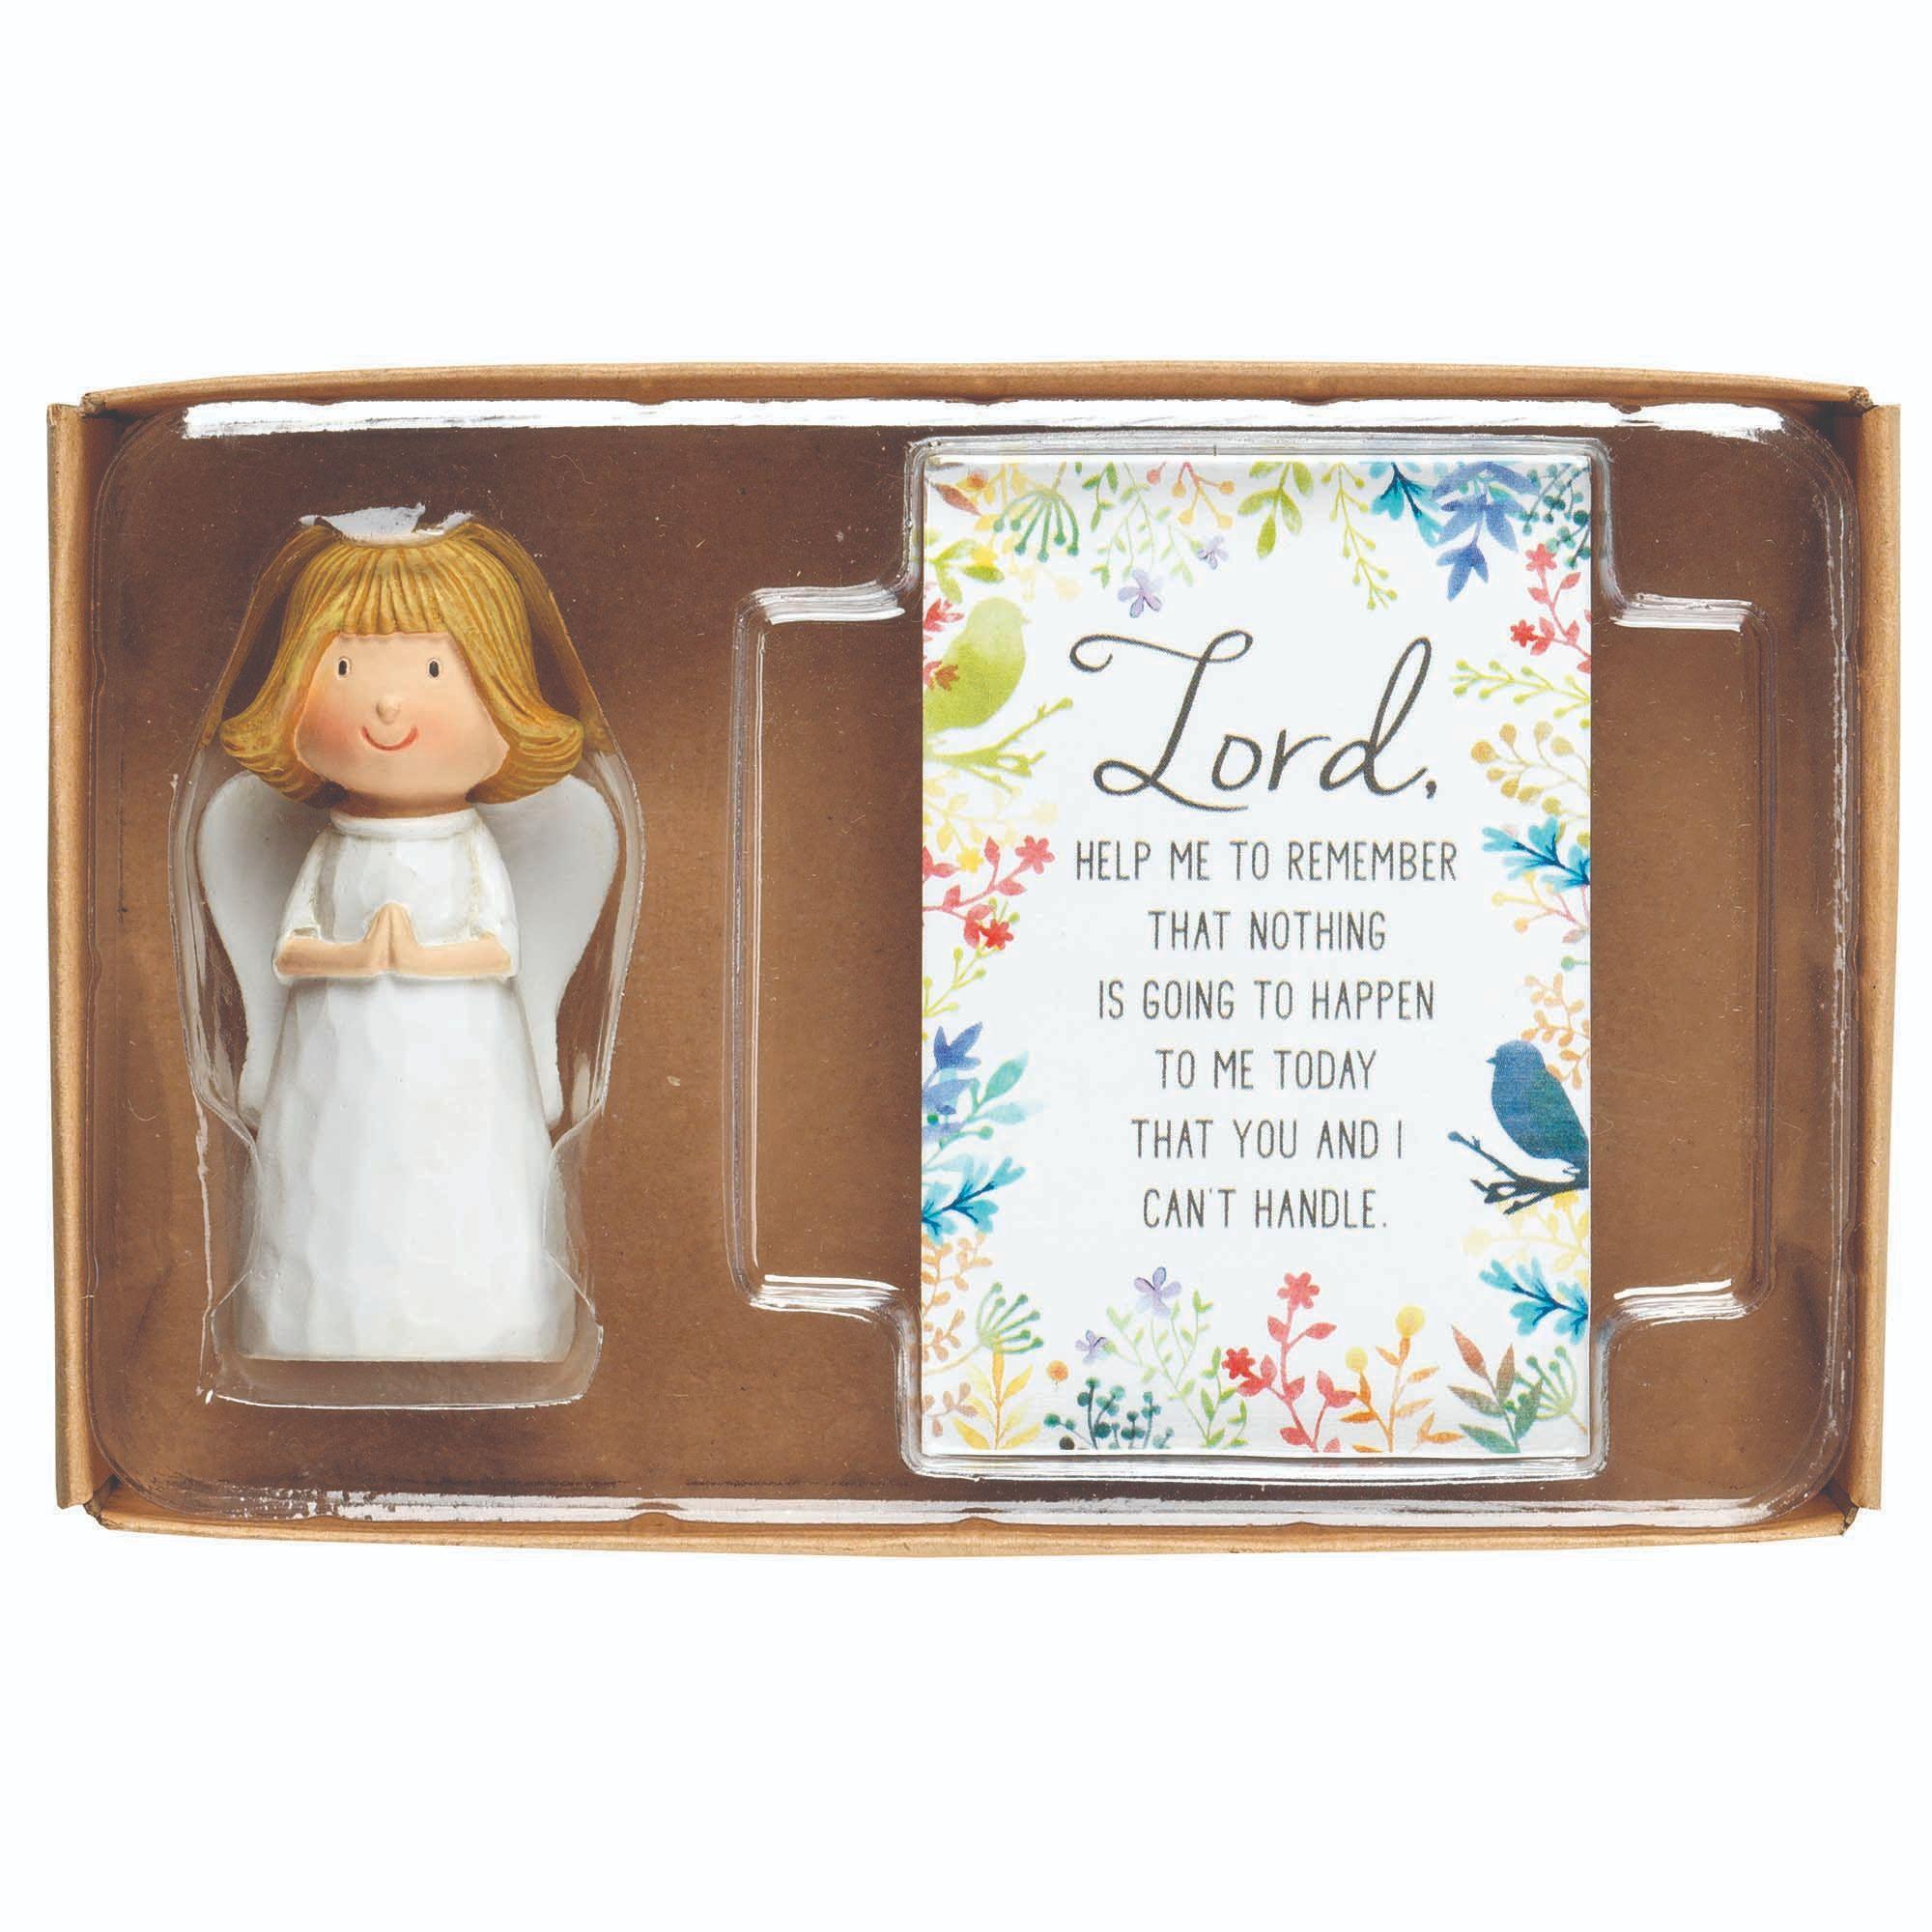 Pack of 2 White and Beige Religious 